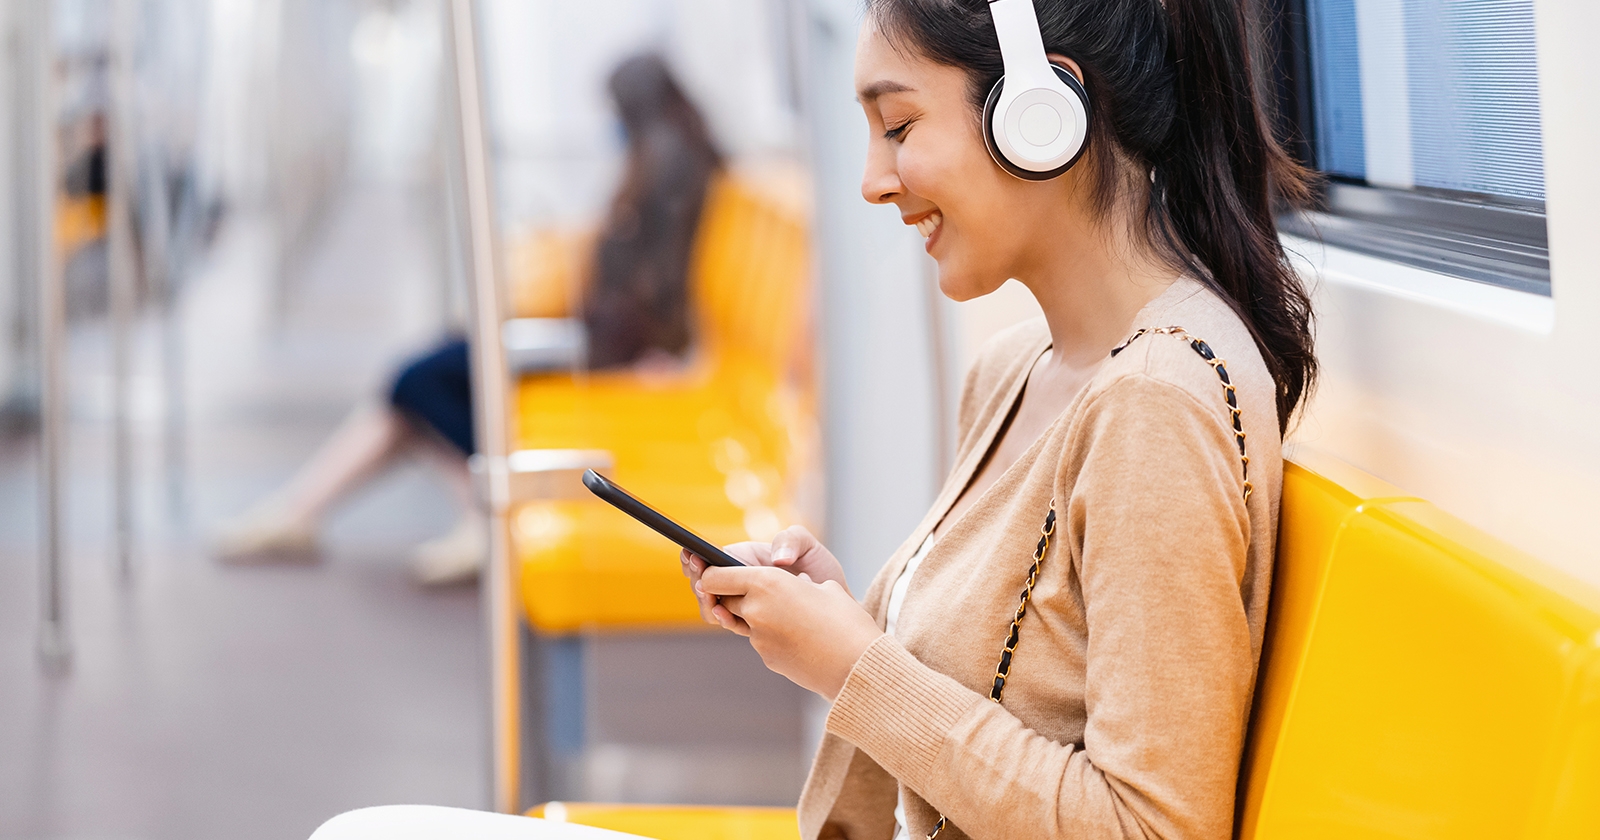 A person sitting in a train wearing headphones. Exponent helps manufacturers improve the quality and performance of consumer products.